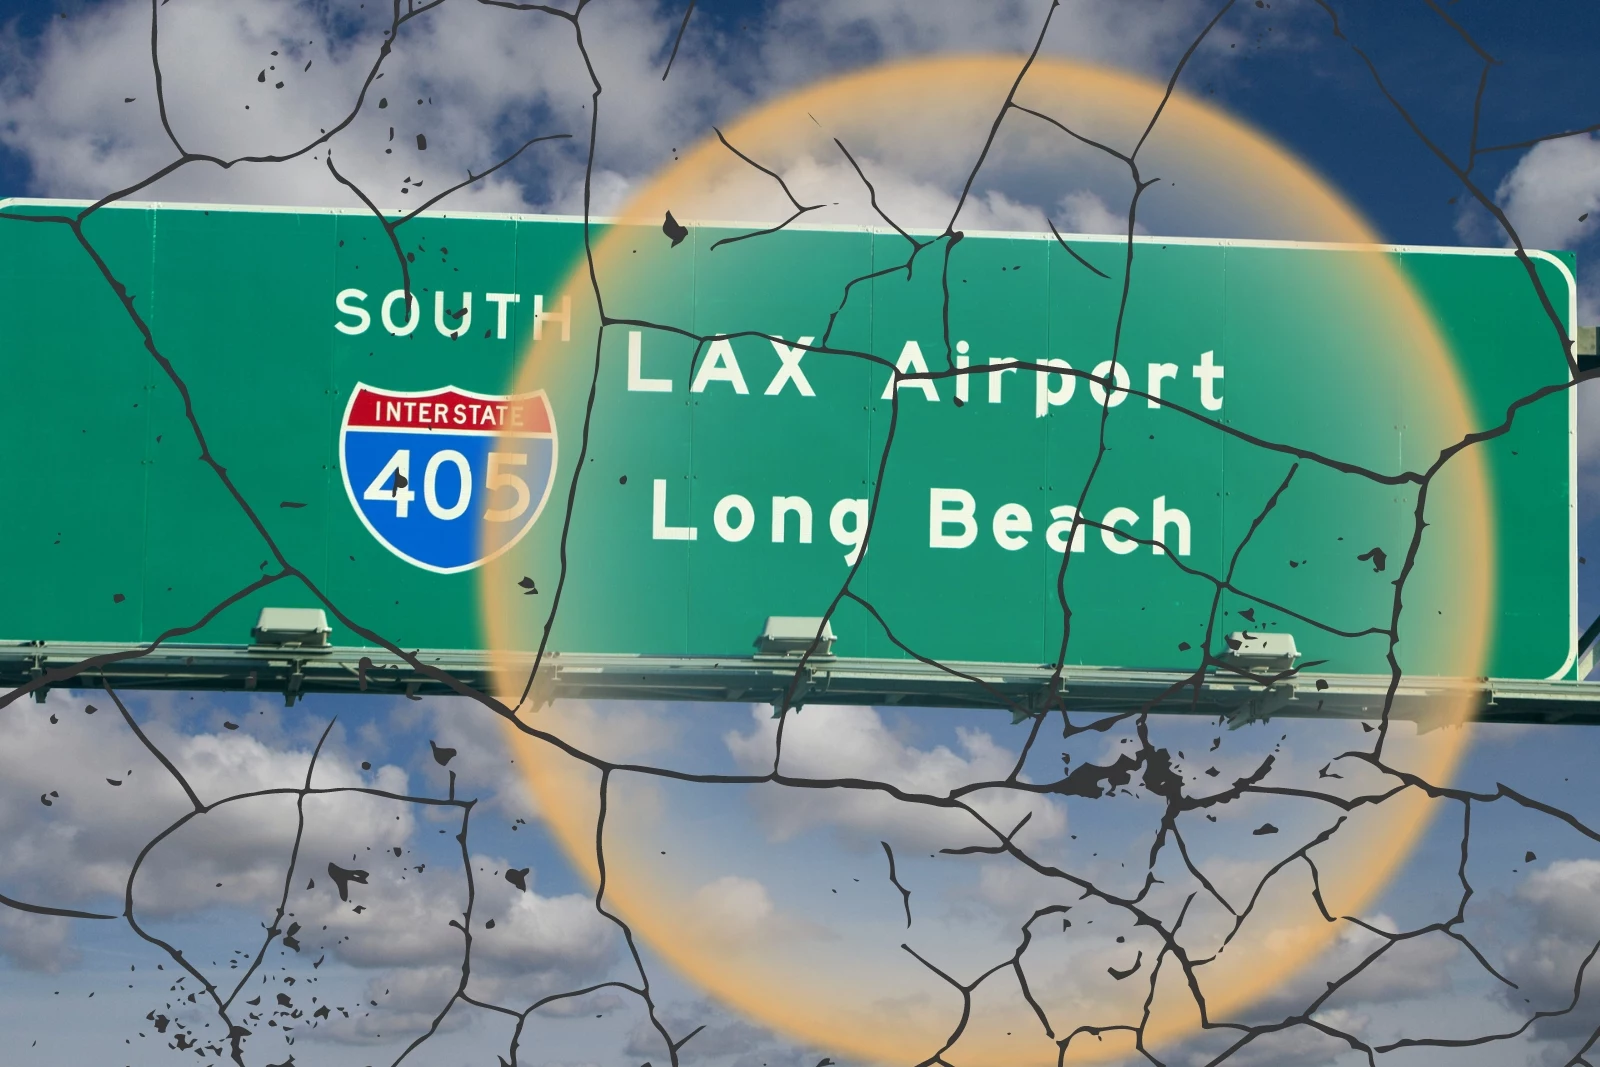 LAX Airport in Los Angeles CA